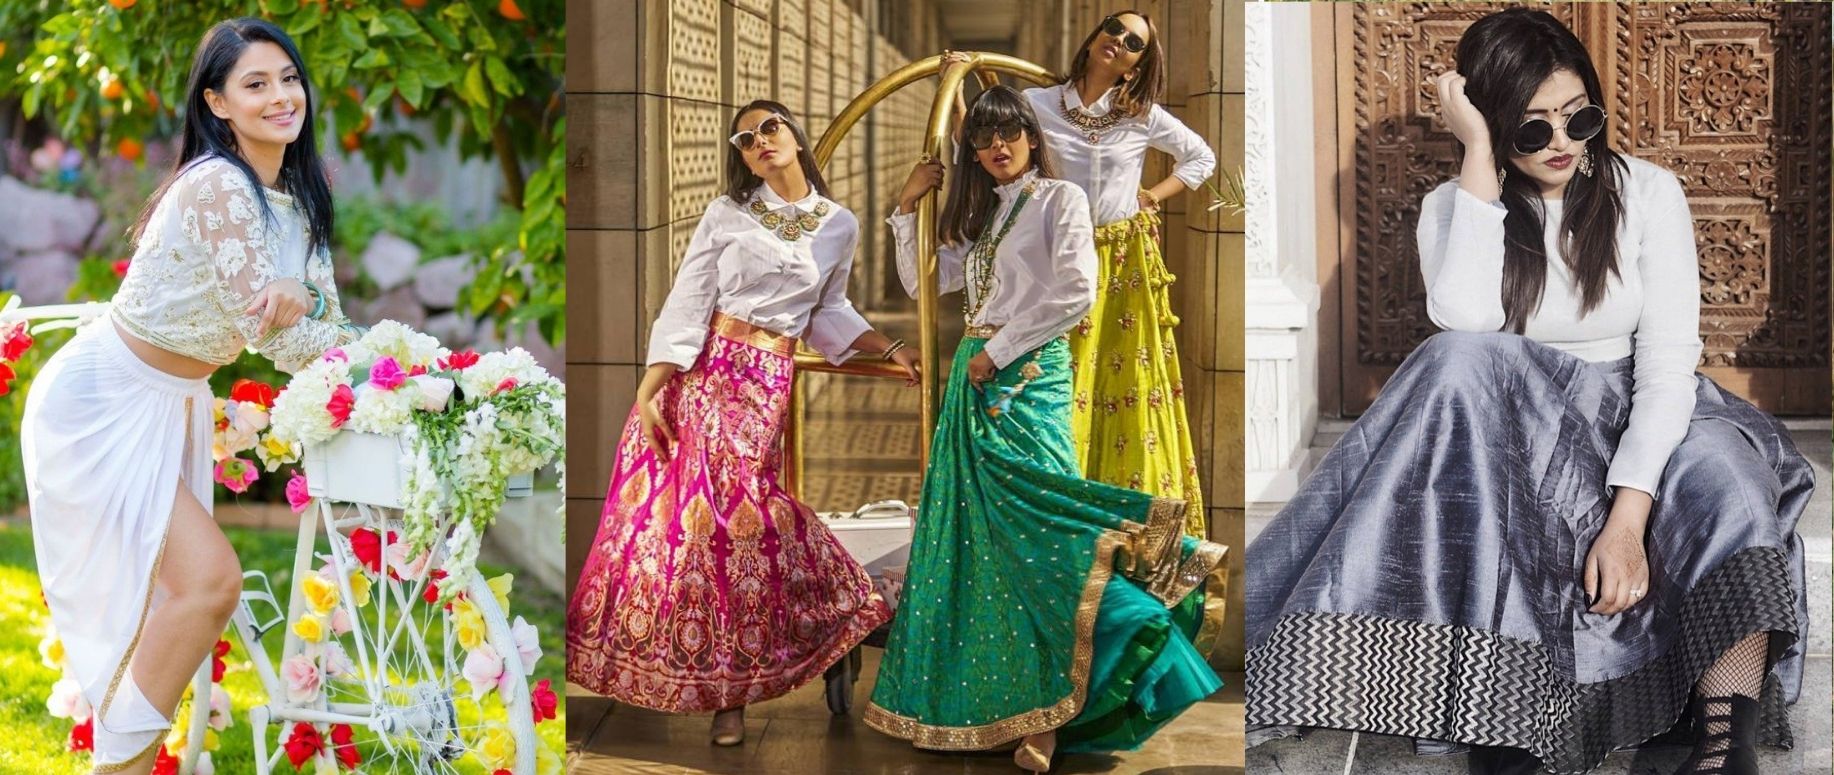 Modern Approach to Indian Ethnic Wear - Fashion Fusion